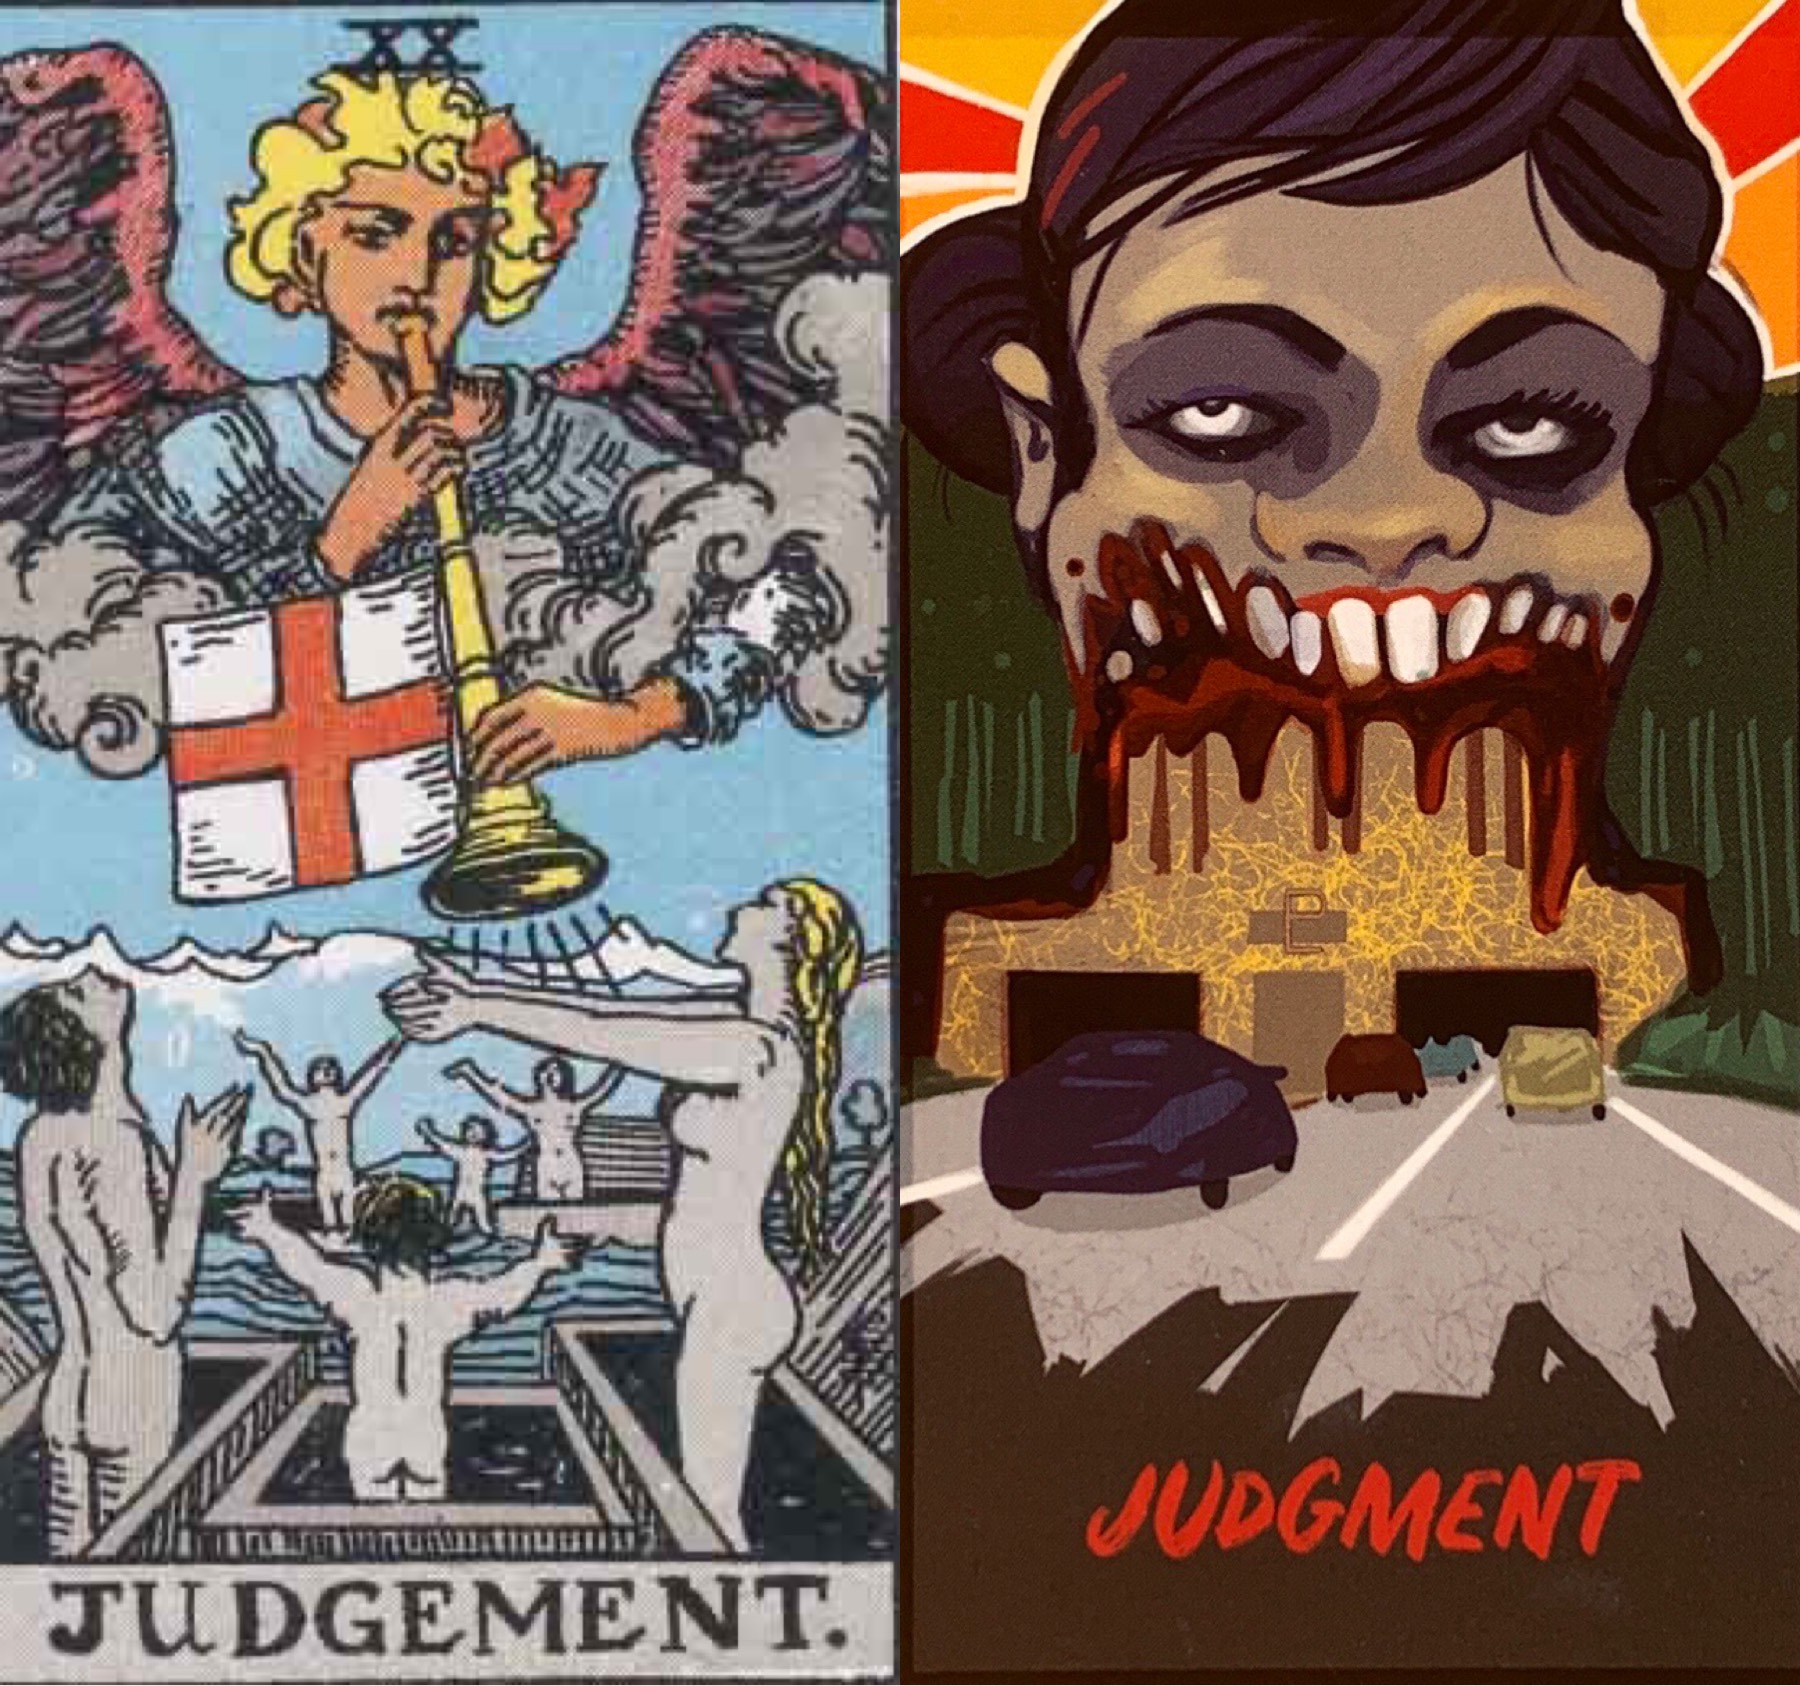 Judgement cards side by side. One is traditional with angelic figure and one is a zombie over a tunnel